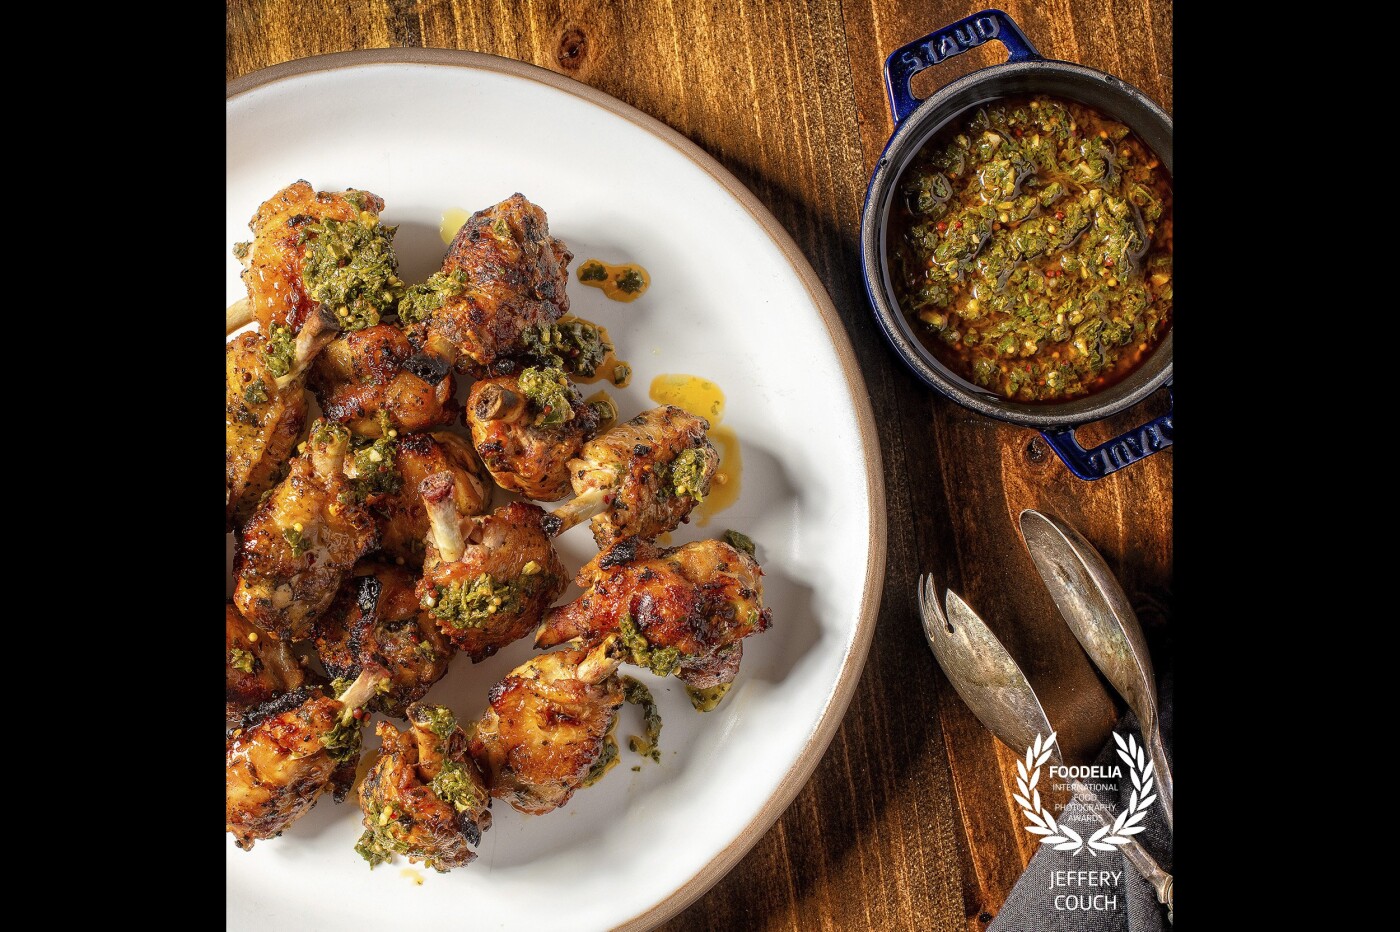 Photoshoot for Charcoal Venice catering menu, Smoky Grilled Chicken Wings, Oregano, Chili, and Vinegar, shown with smoked paprika mustard chimichurri. <br />
@charcoalvenice<br />
@josiahcitrin